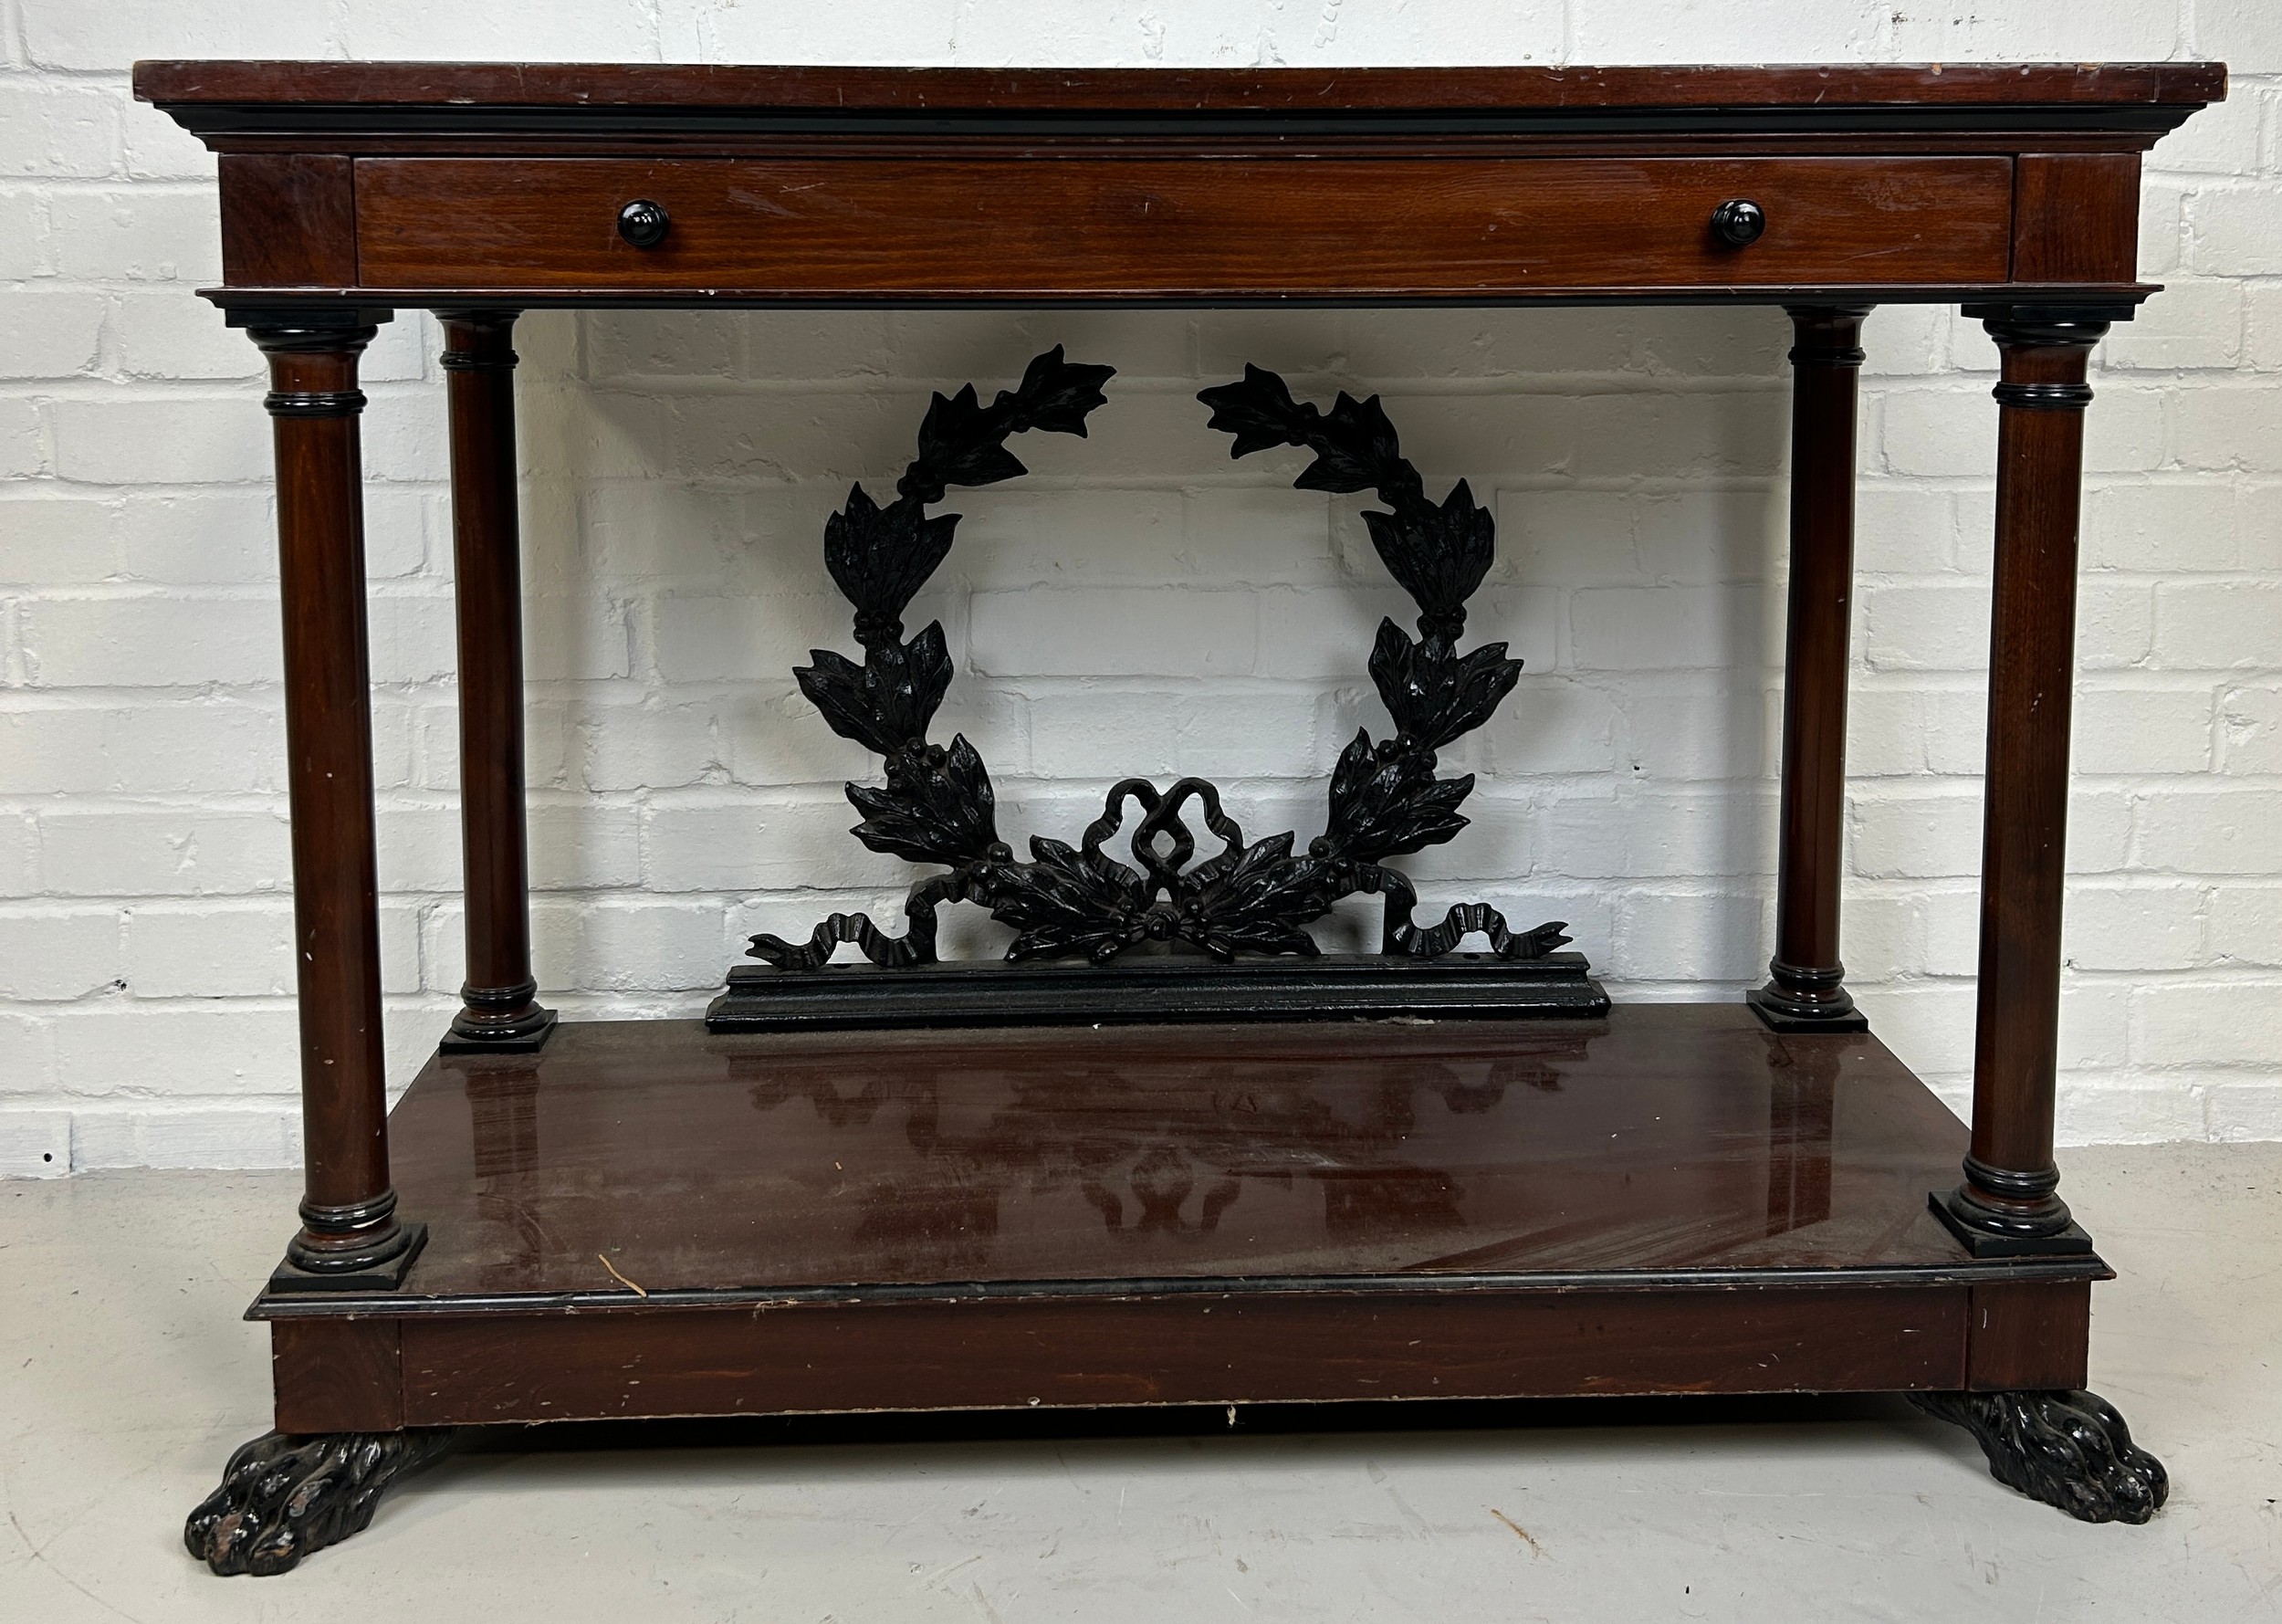 A REGENCY STYLE REPRODUCTION MAHOGANY CONSOLE TABLE WITH METAL WREATH, 108cm x 80cm x 46cm